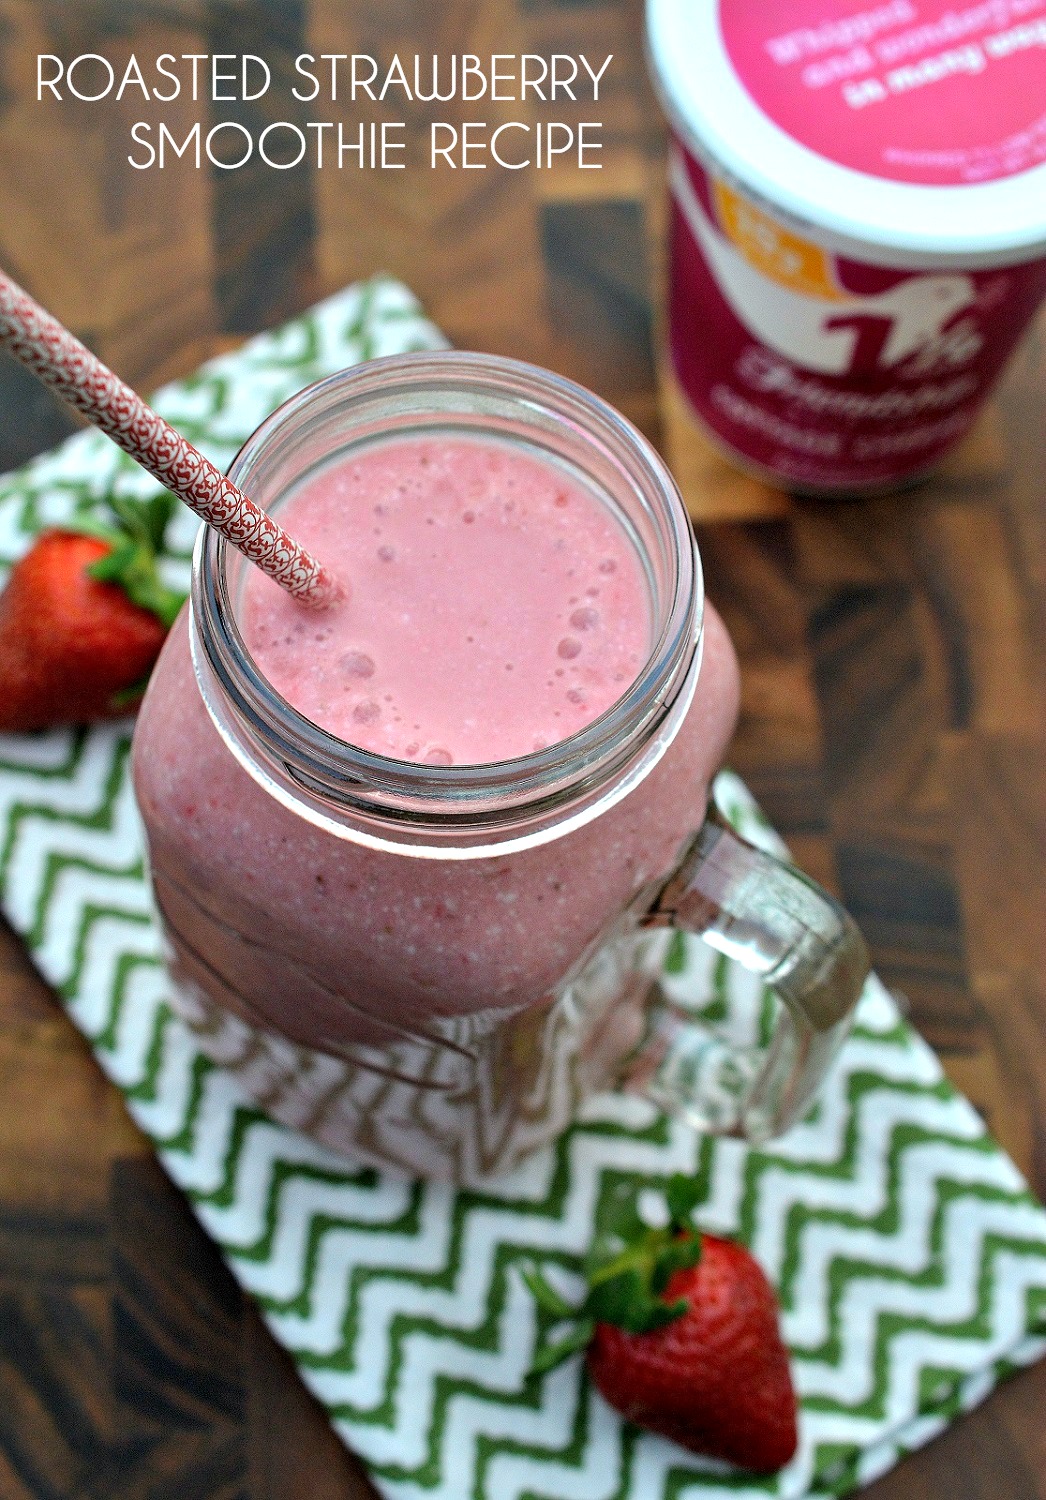 Roasted Strawberry Smoothie Recipe: This decadent cottage cheese based smoothie is packed with protein and nutrients for a healthy breakfast on the go!